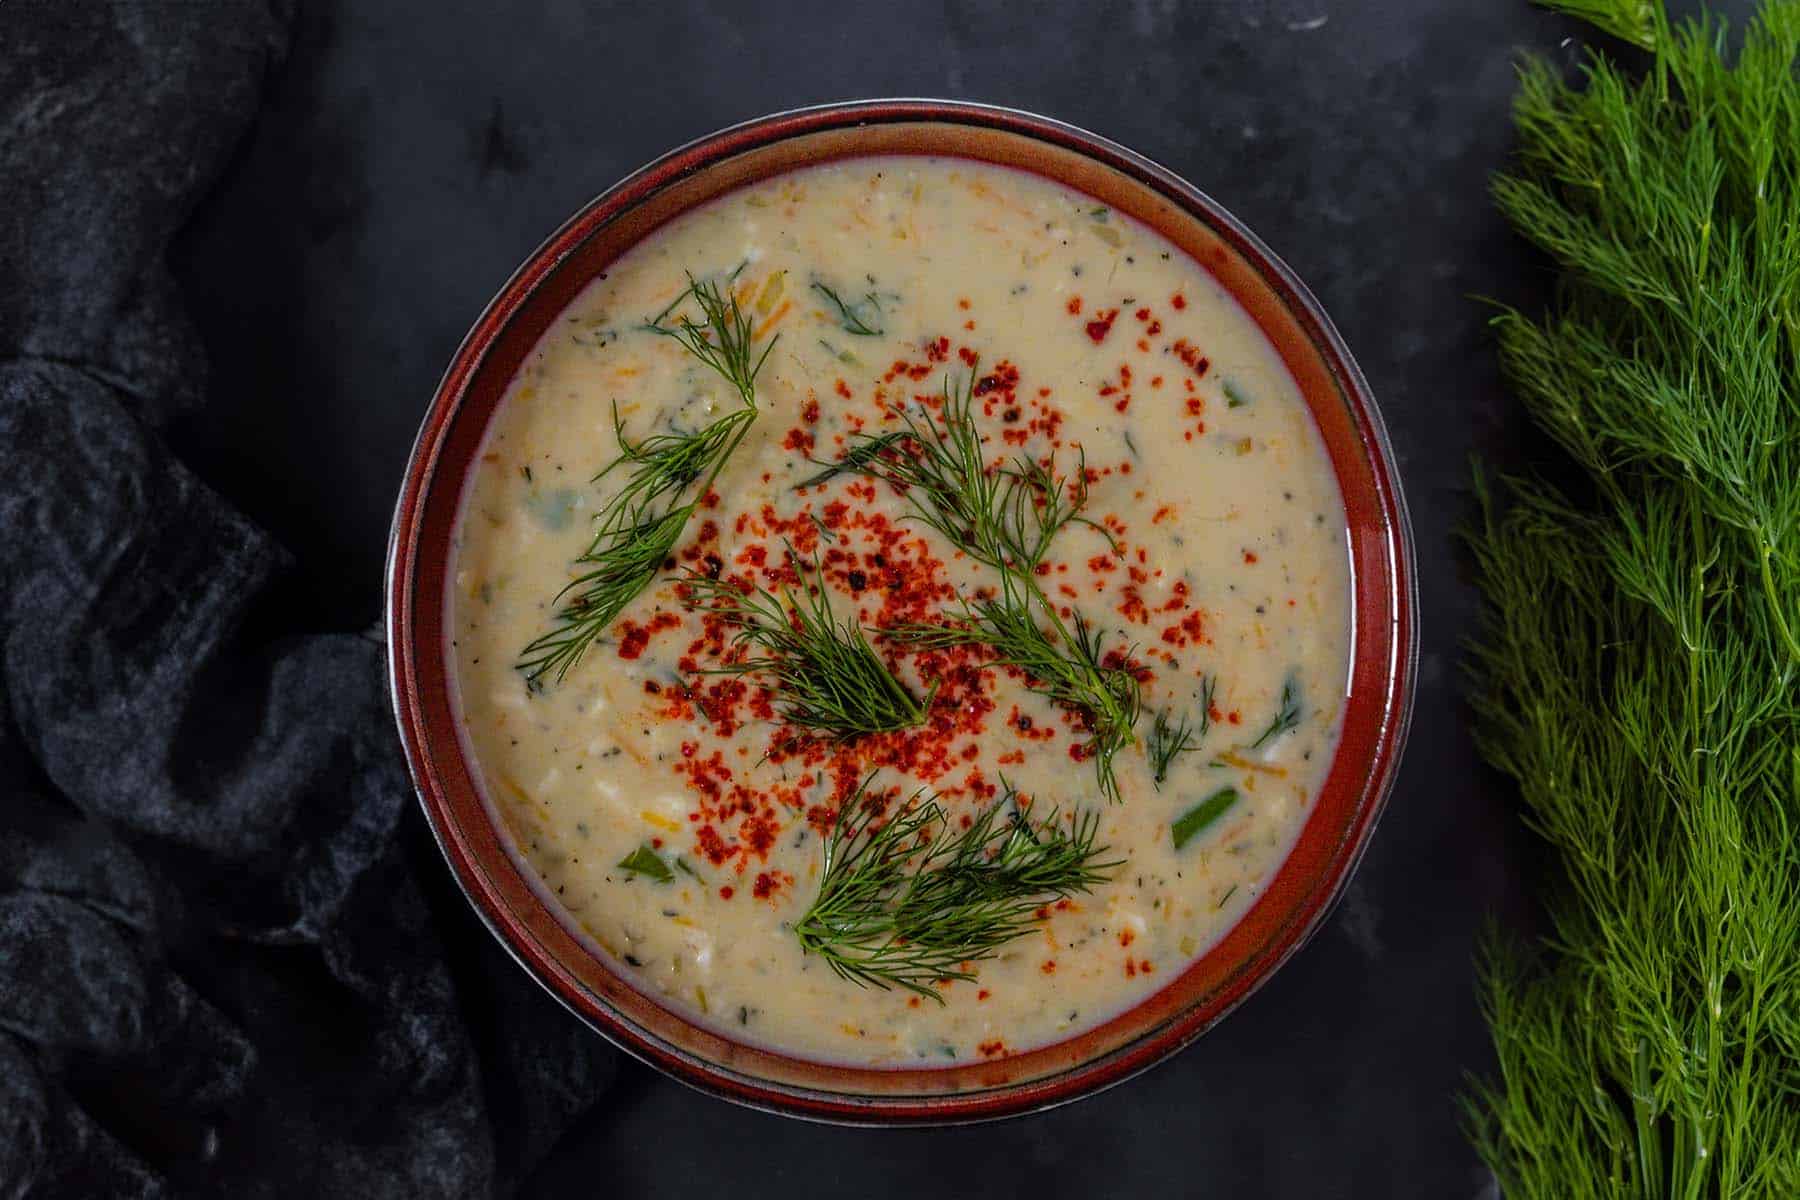 cream coloured vegan yoghurt soup in a brown bowl on a black background. The soup is garnished with sprigs of green dill and bright red aleppo pepper. A large bundle of dill sits on the side of the bowl.